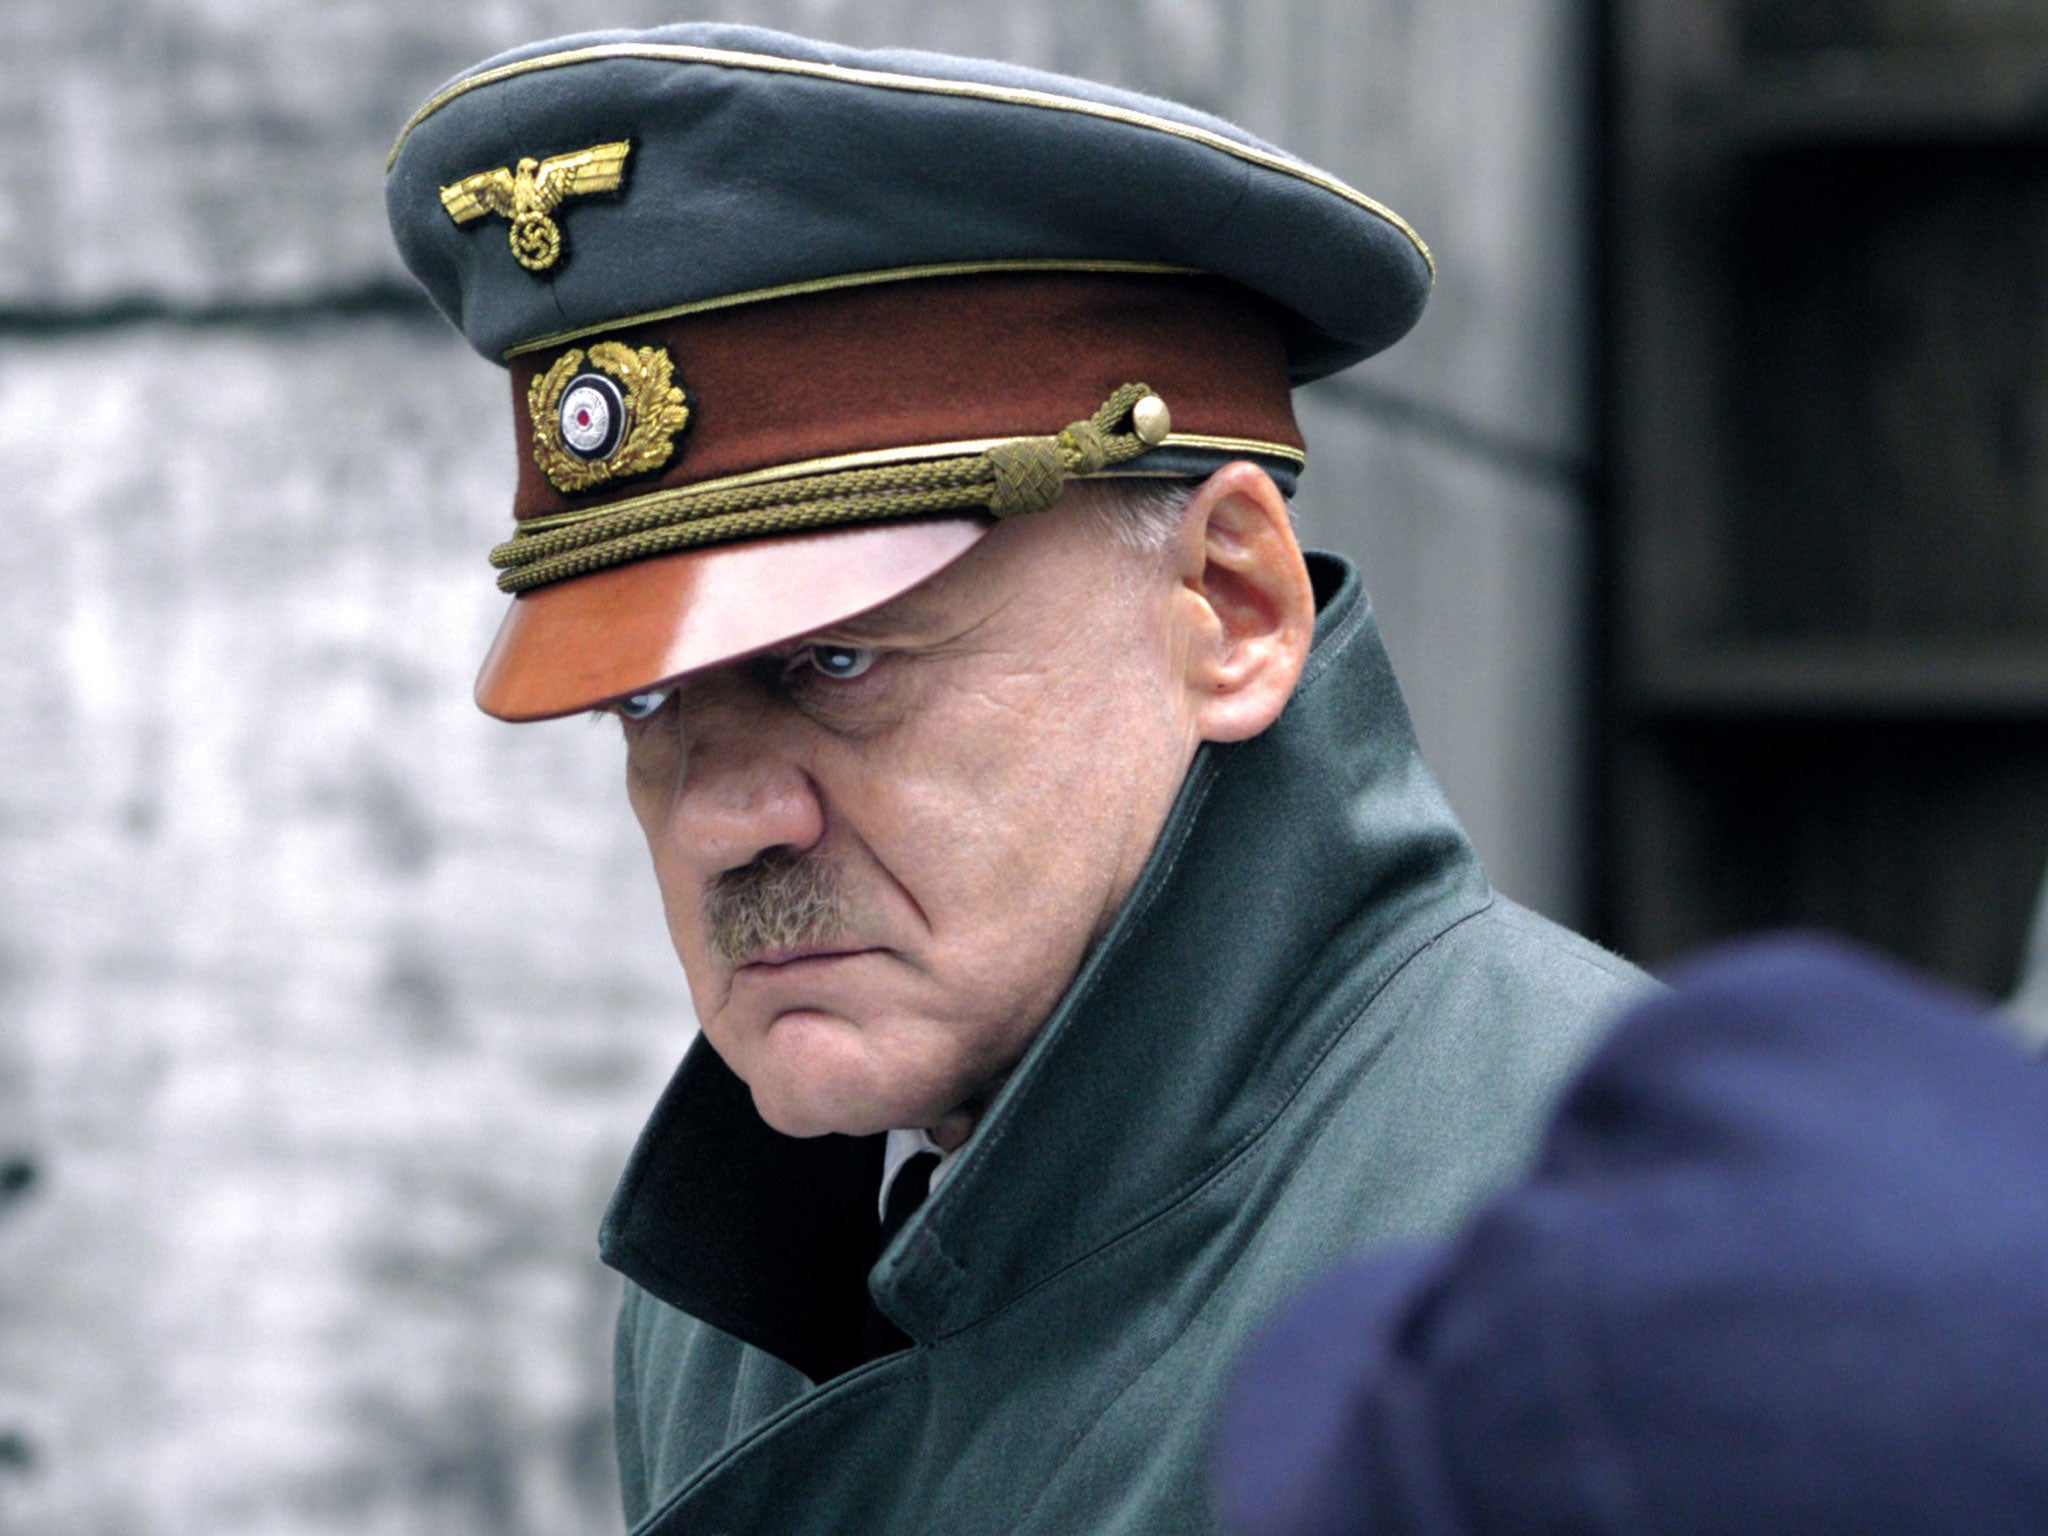 Swiss actor Bruno Ganz is most well-known for his portrayal of Hitler in Downfall